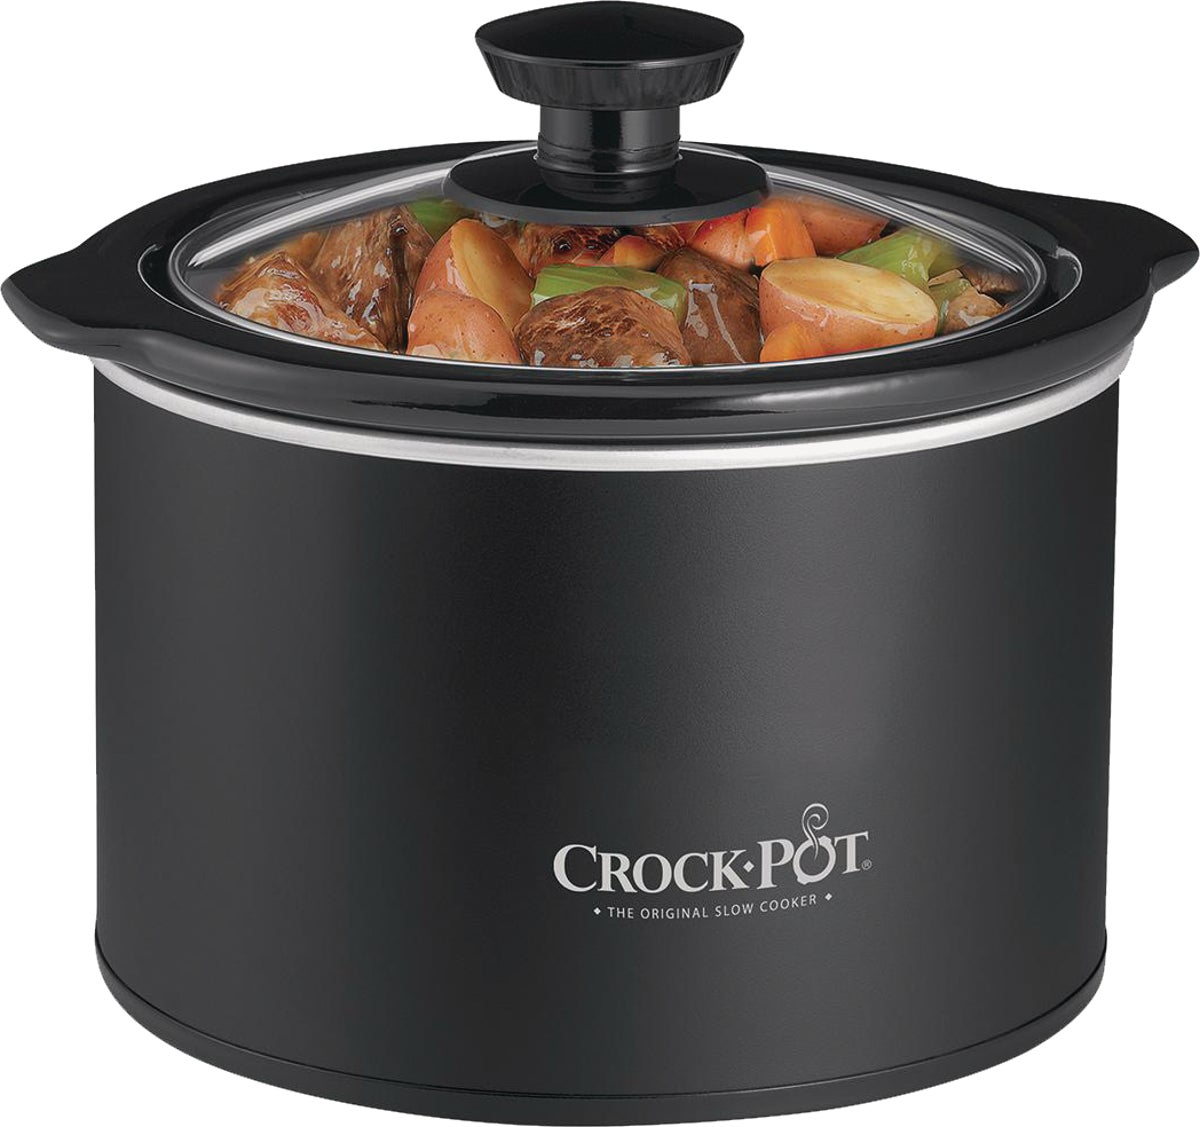 Oster DiamondForce 6 Cup Nonstick Electric Rice Cooker Black New